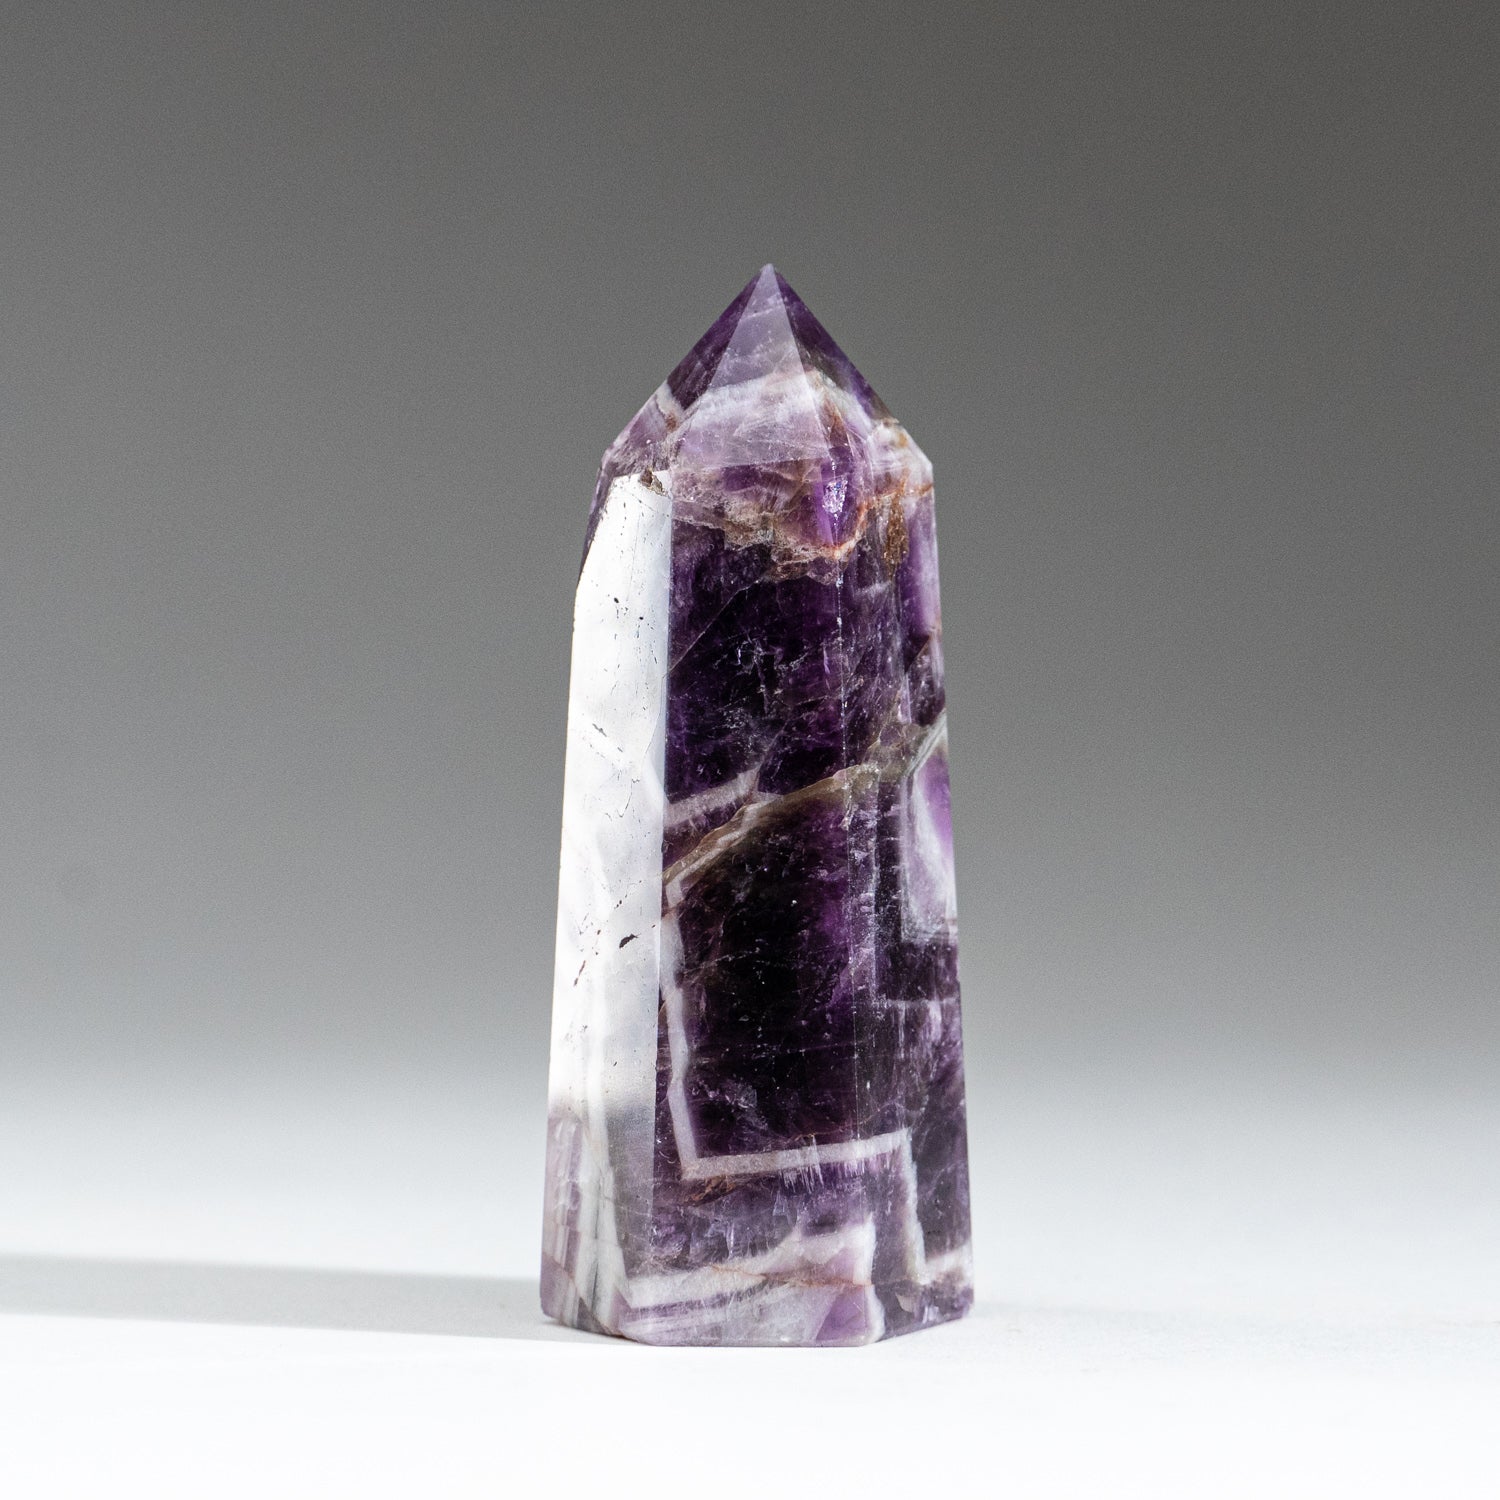 Polished Chevron Amethyst Point from Brazil (118.4 grams)